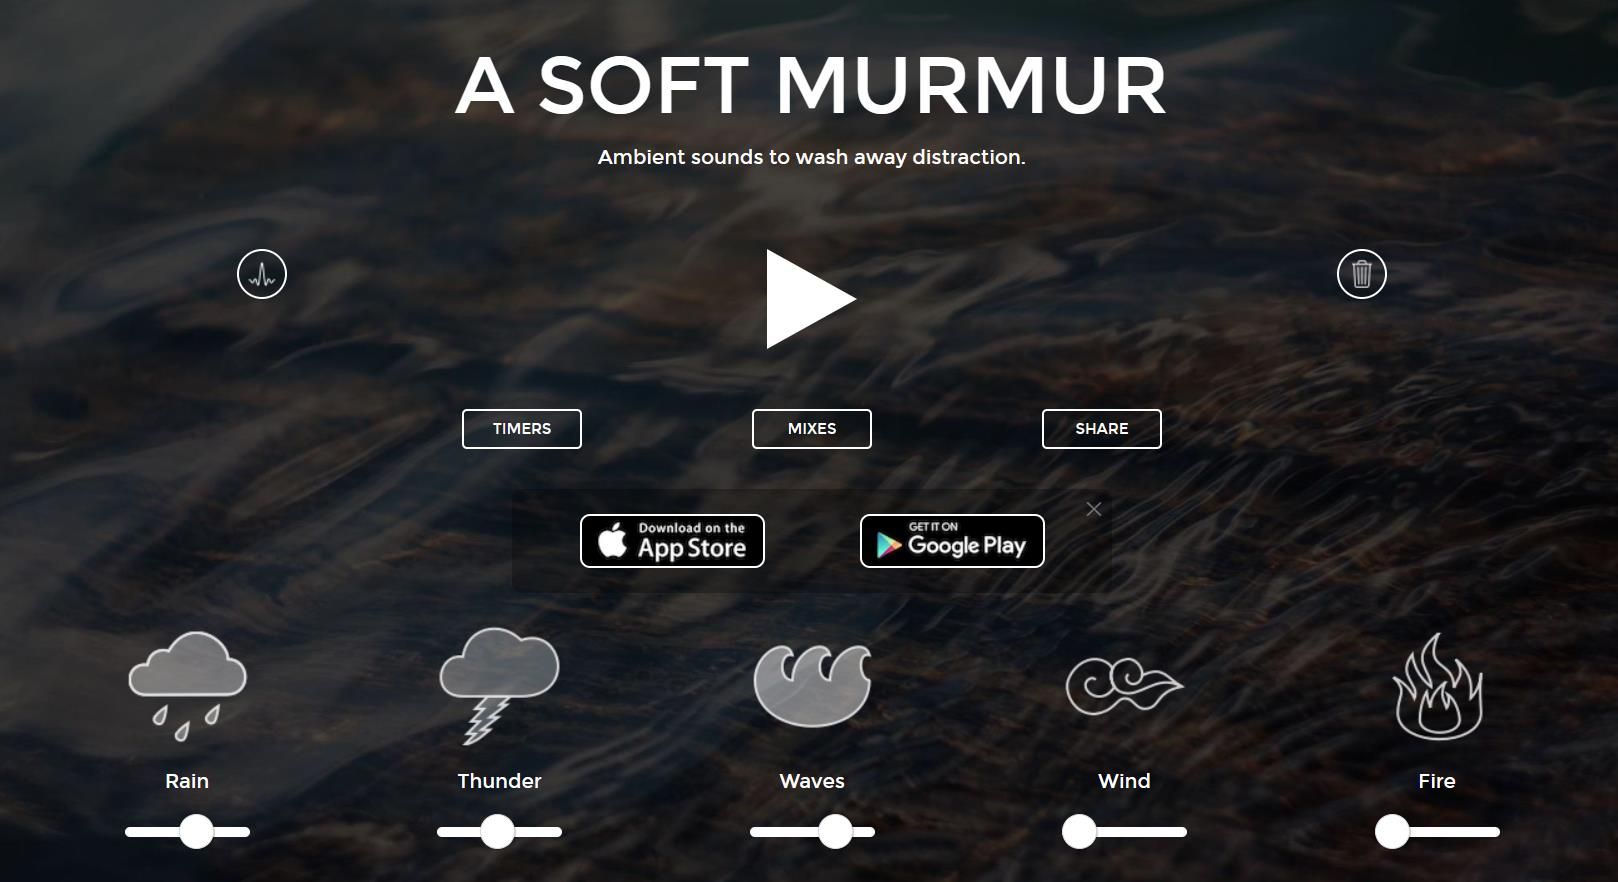 A soft murmur ambient sounds homepage